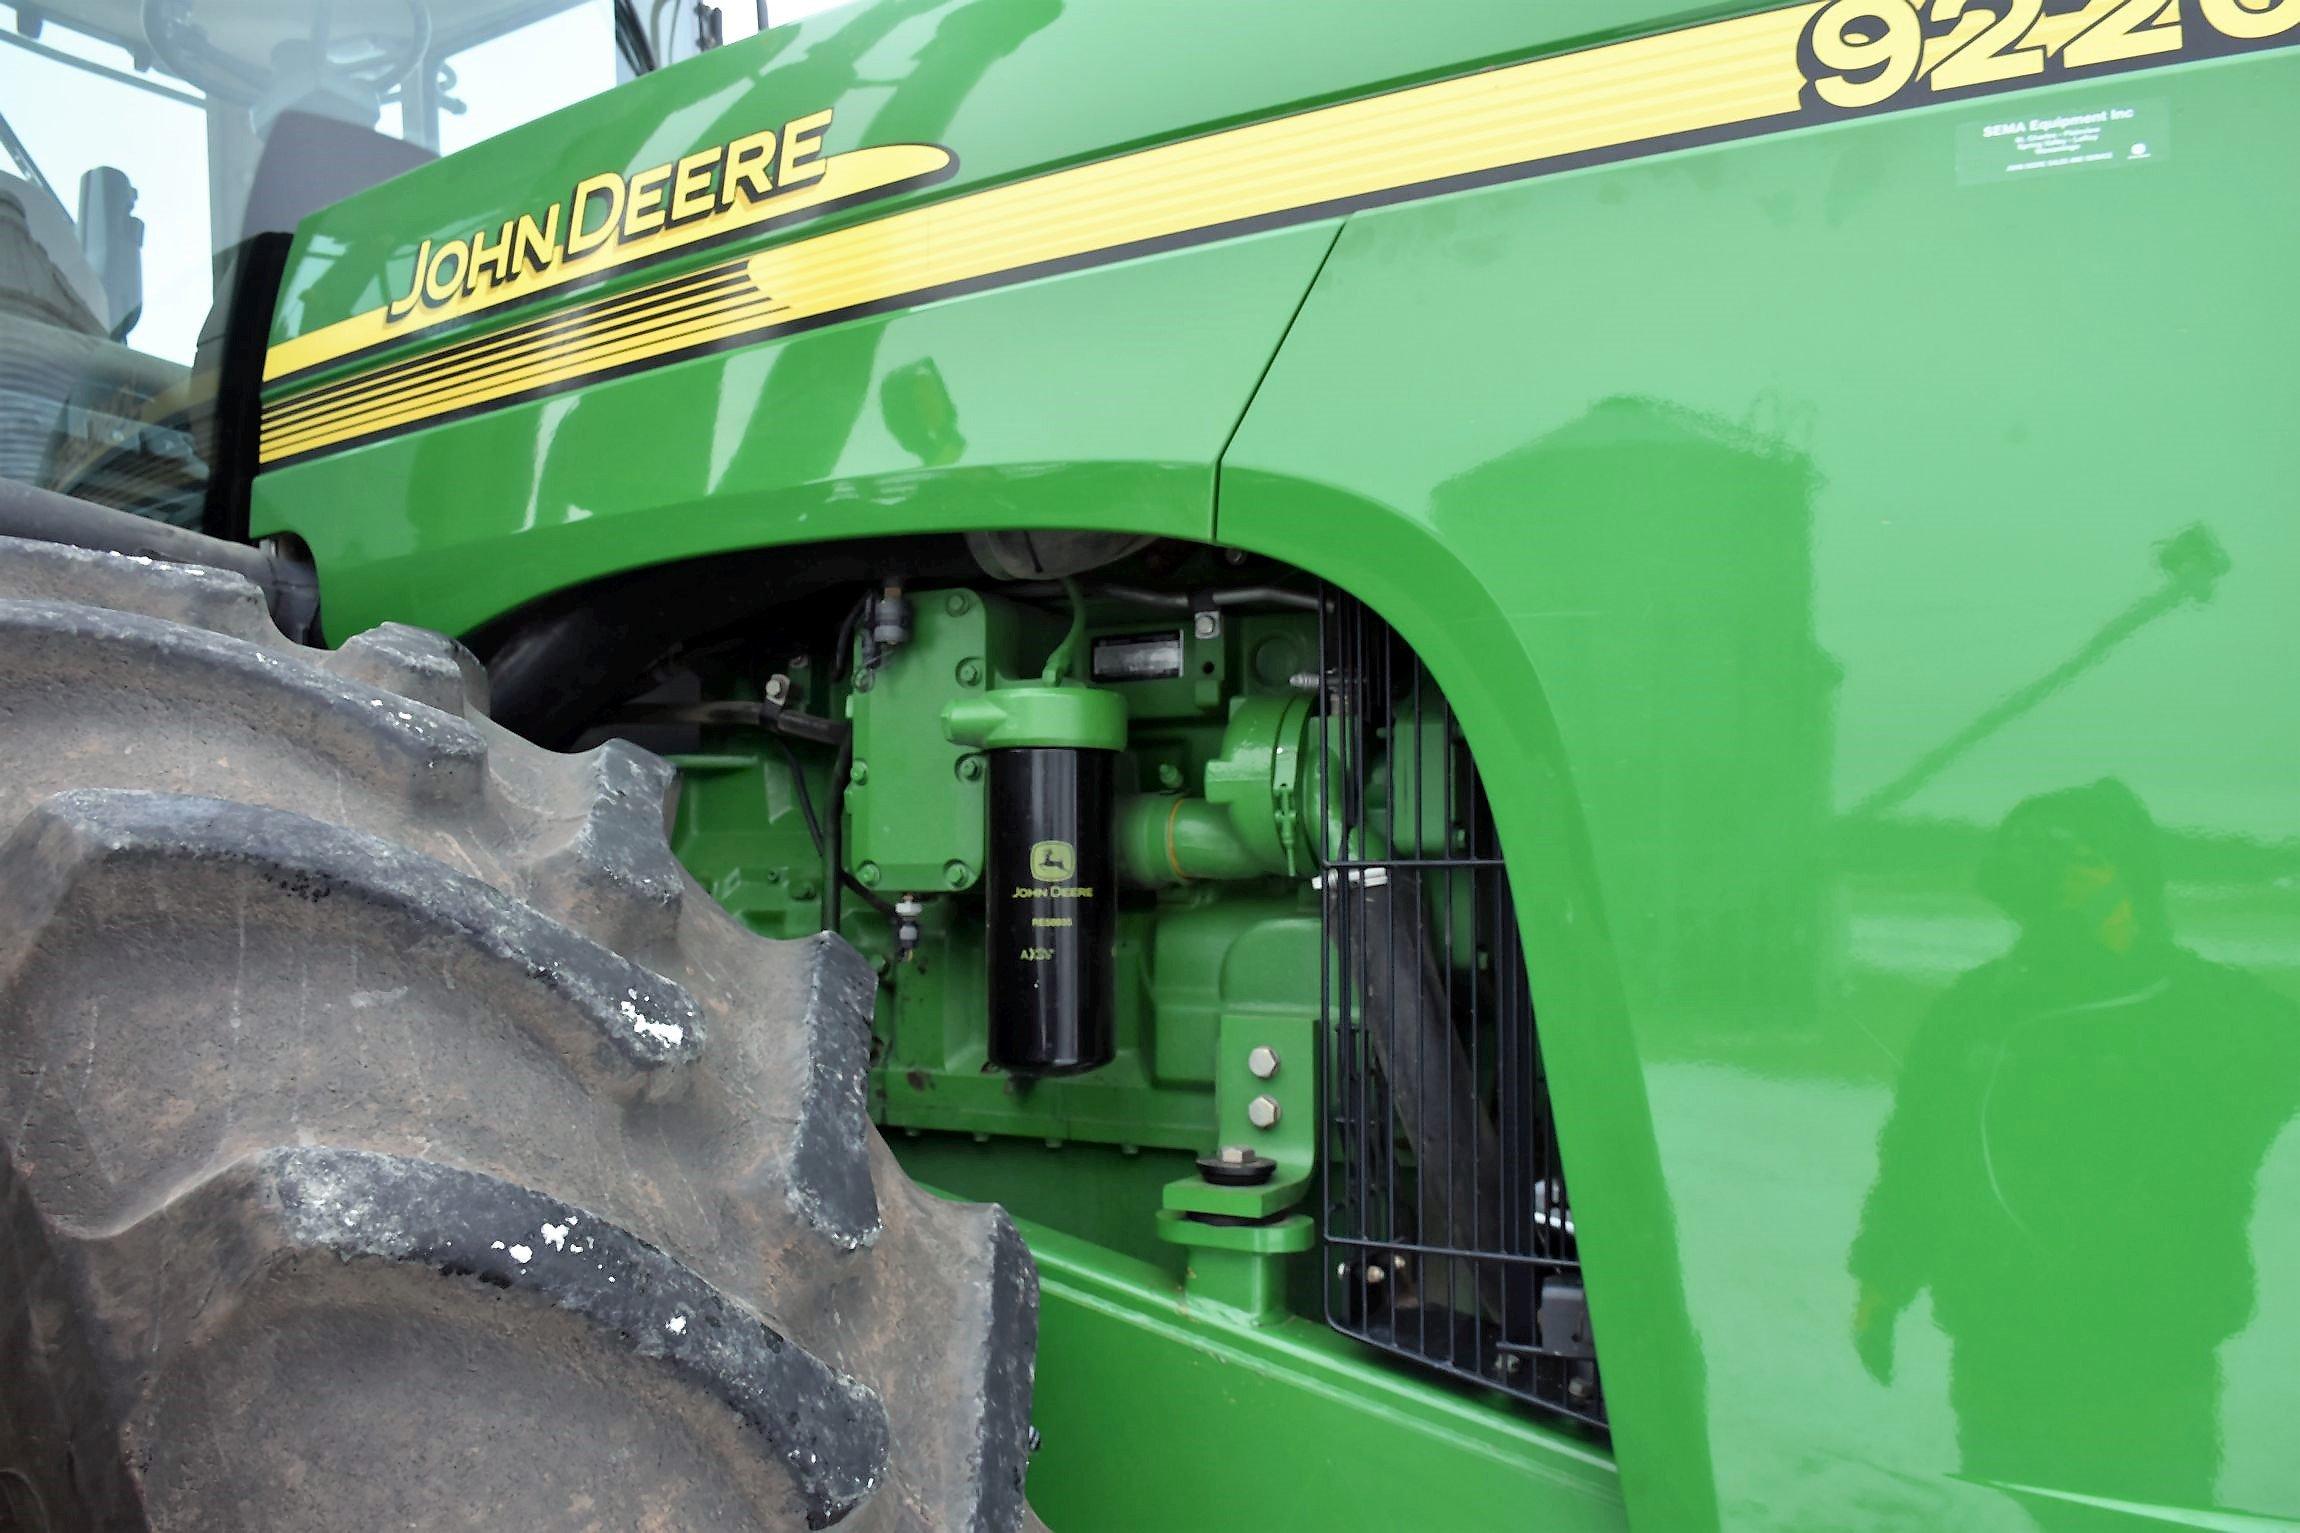 2006 John Deere 9220 4WD Tractor, 1895 Actual Hours, 620/70R42 Tires At 80%, (6) 205KG Rear Wheel We